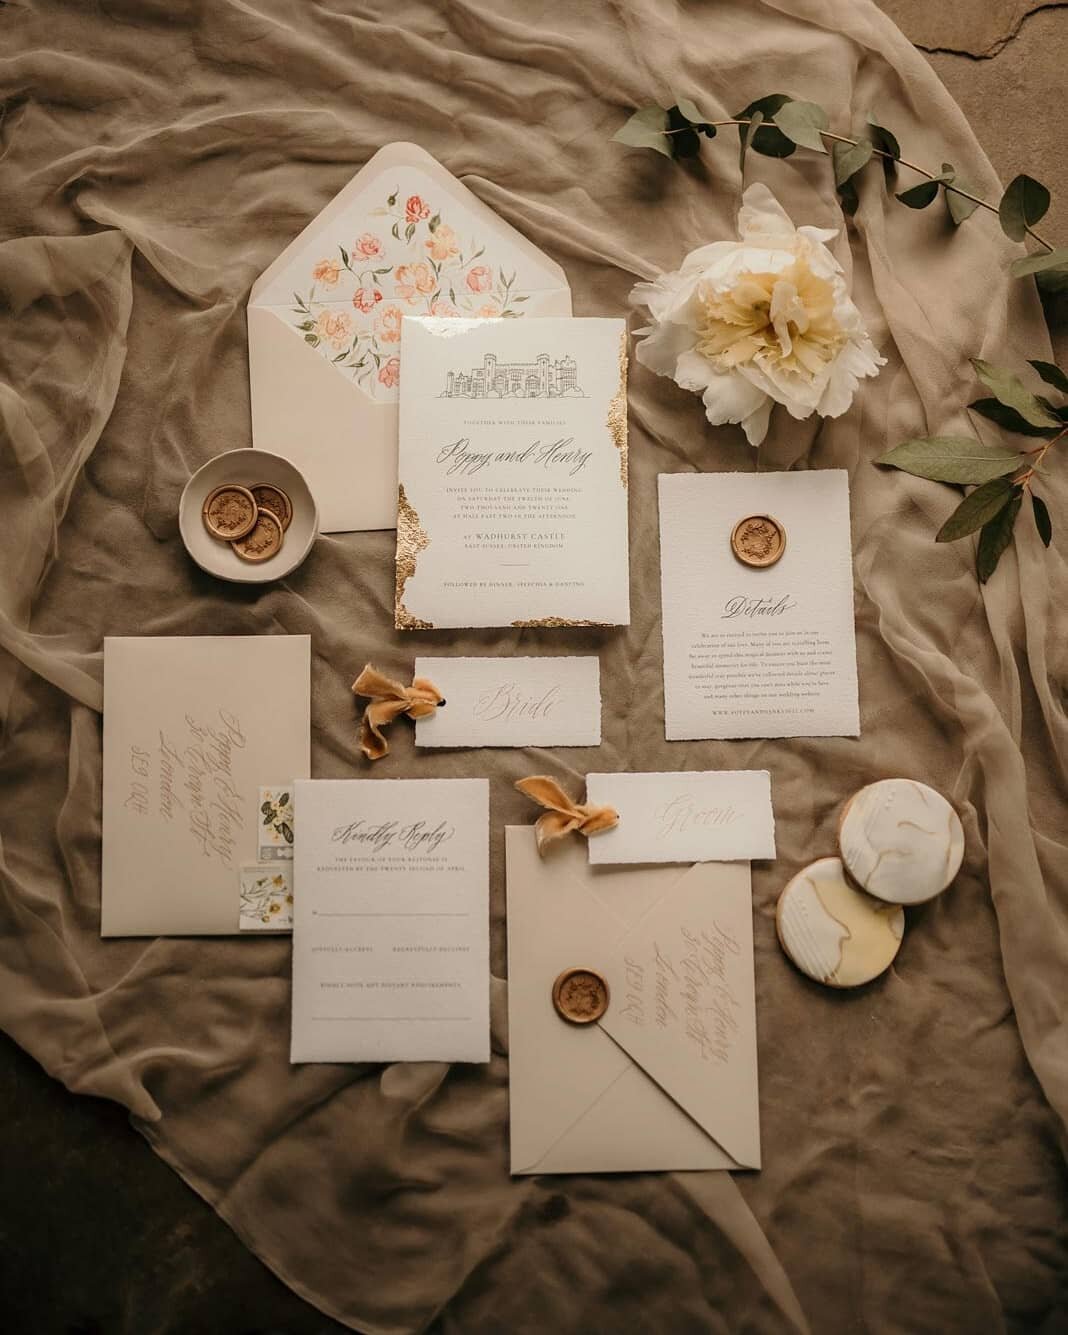 A throwback to this romantic wedding suite with all the delicate sparkling details at  @wadhurstcastle. A venue illustration, watercolour liner, wax seals and envelope addressing in a flowing calligraphy script ✨
.
.
CONCEPT, DIRECTION &amp; PHOTOGRA